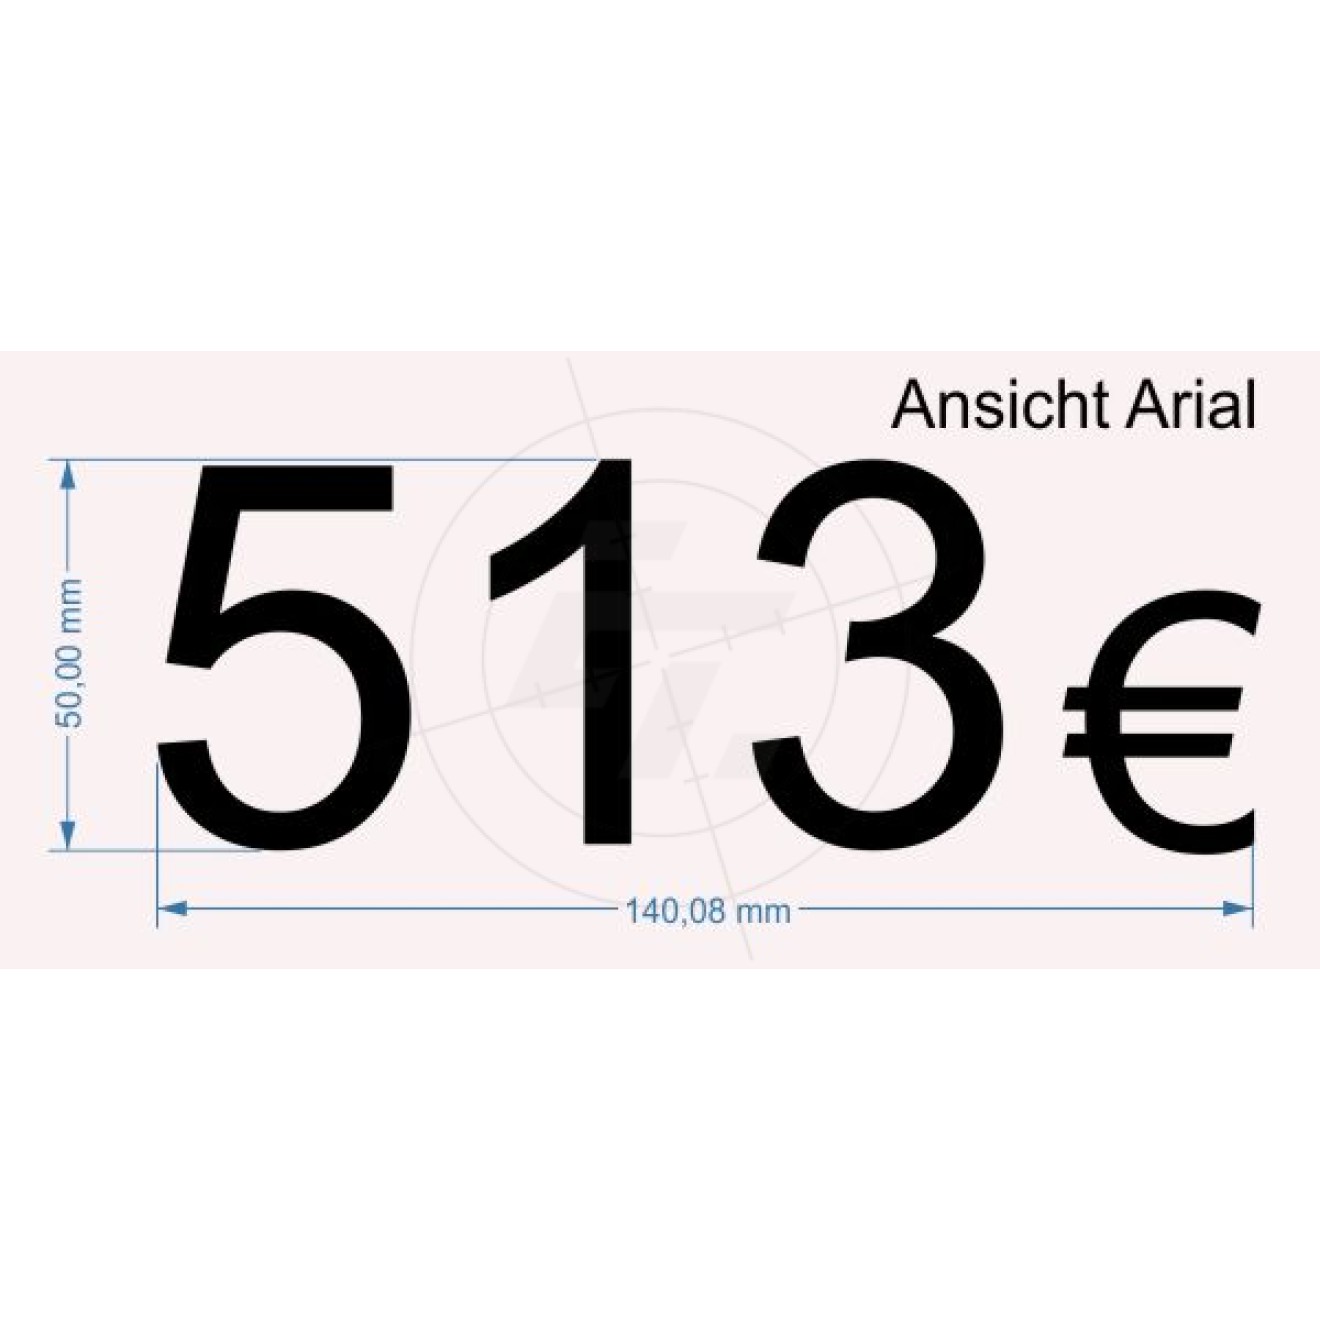 Figure sticker three-digit, with euro signs